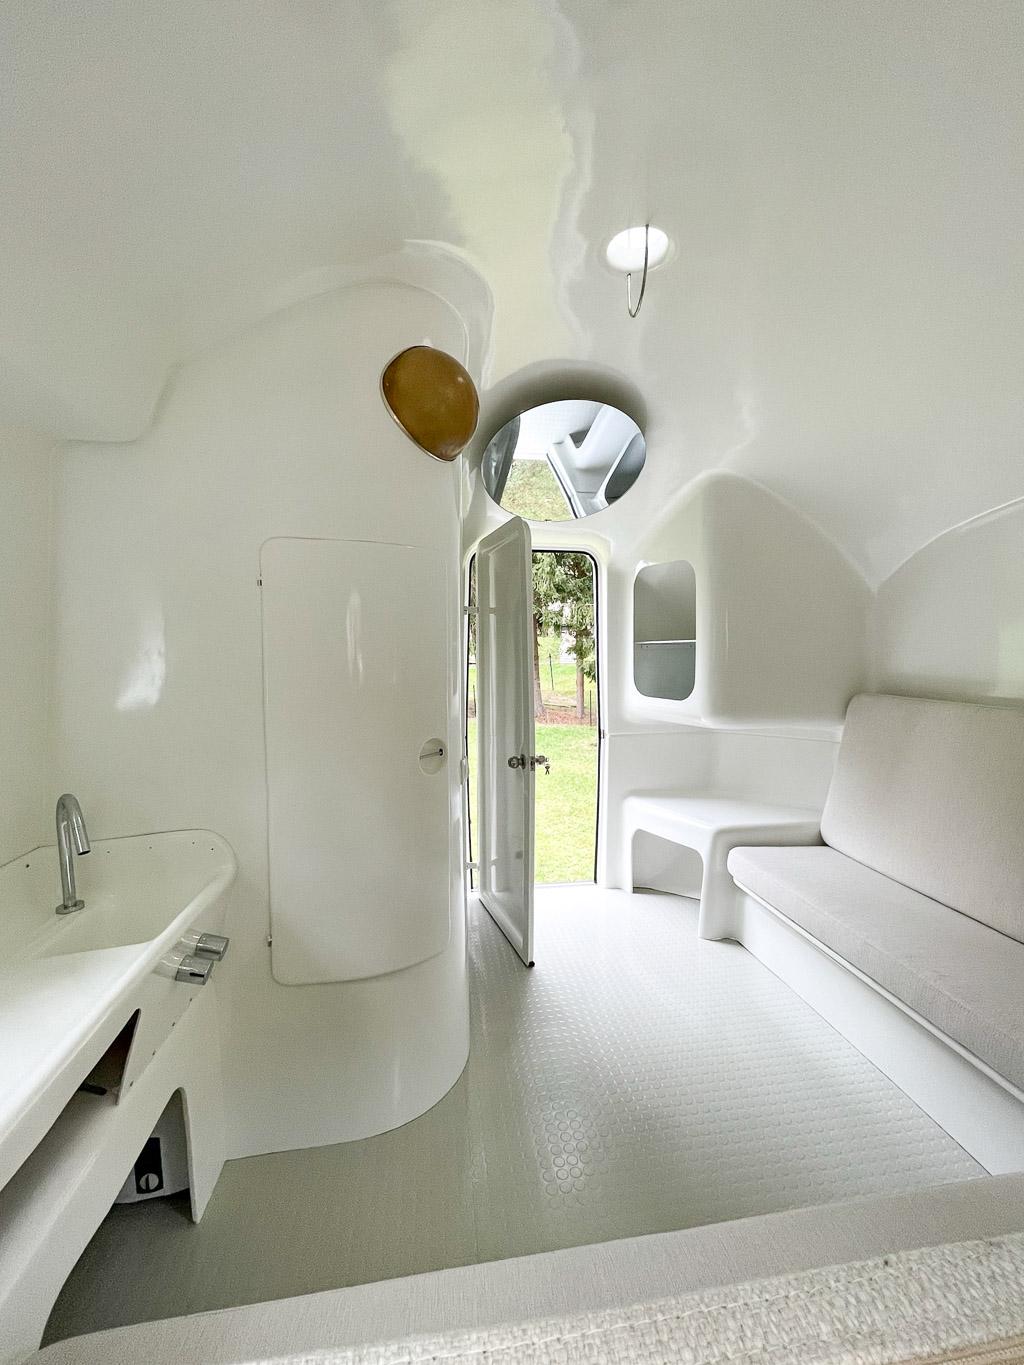 1 BANGA space age micro architecture prefab house bungalow by Carlo Zappa, 1971 For Sale 4